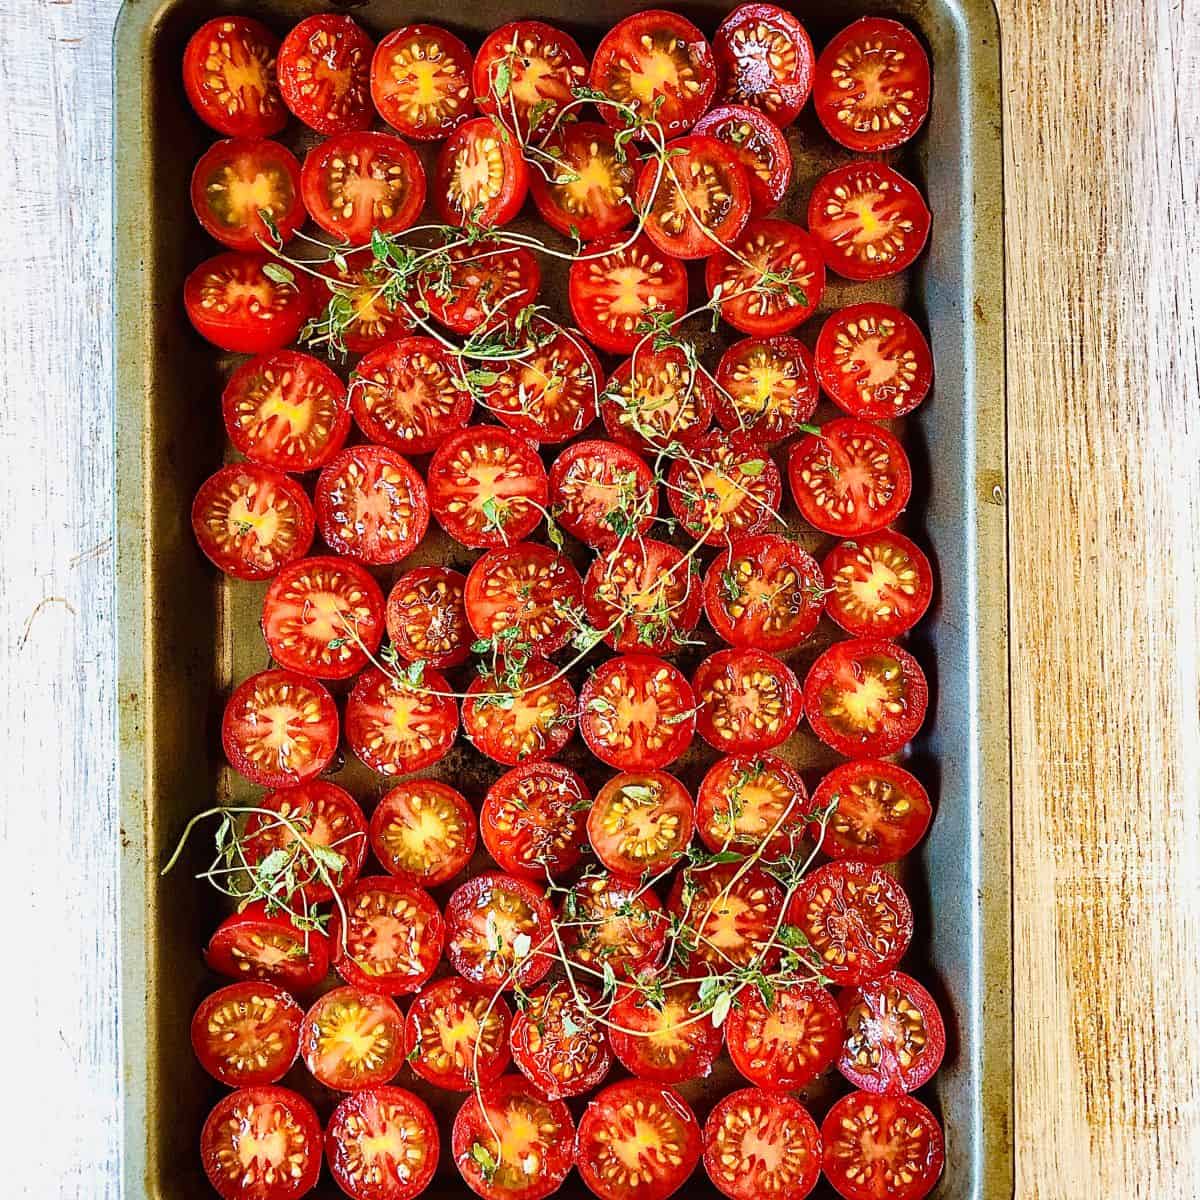 A baking tray filled with cherry tomatoes sliced in half with sprigs of thyme, ready for cooking.